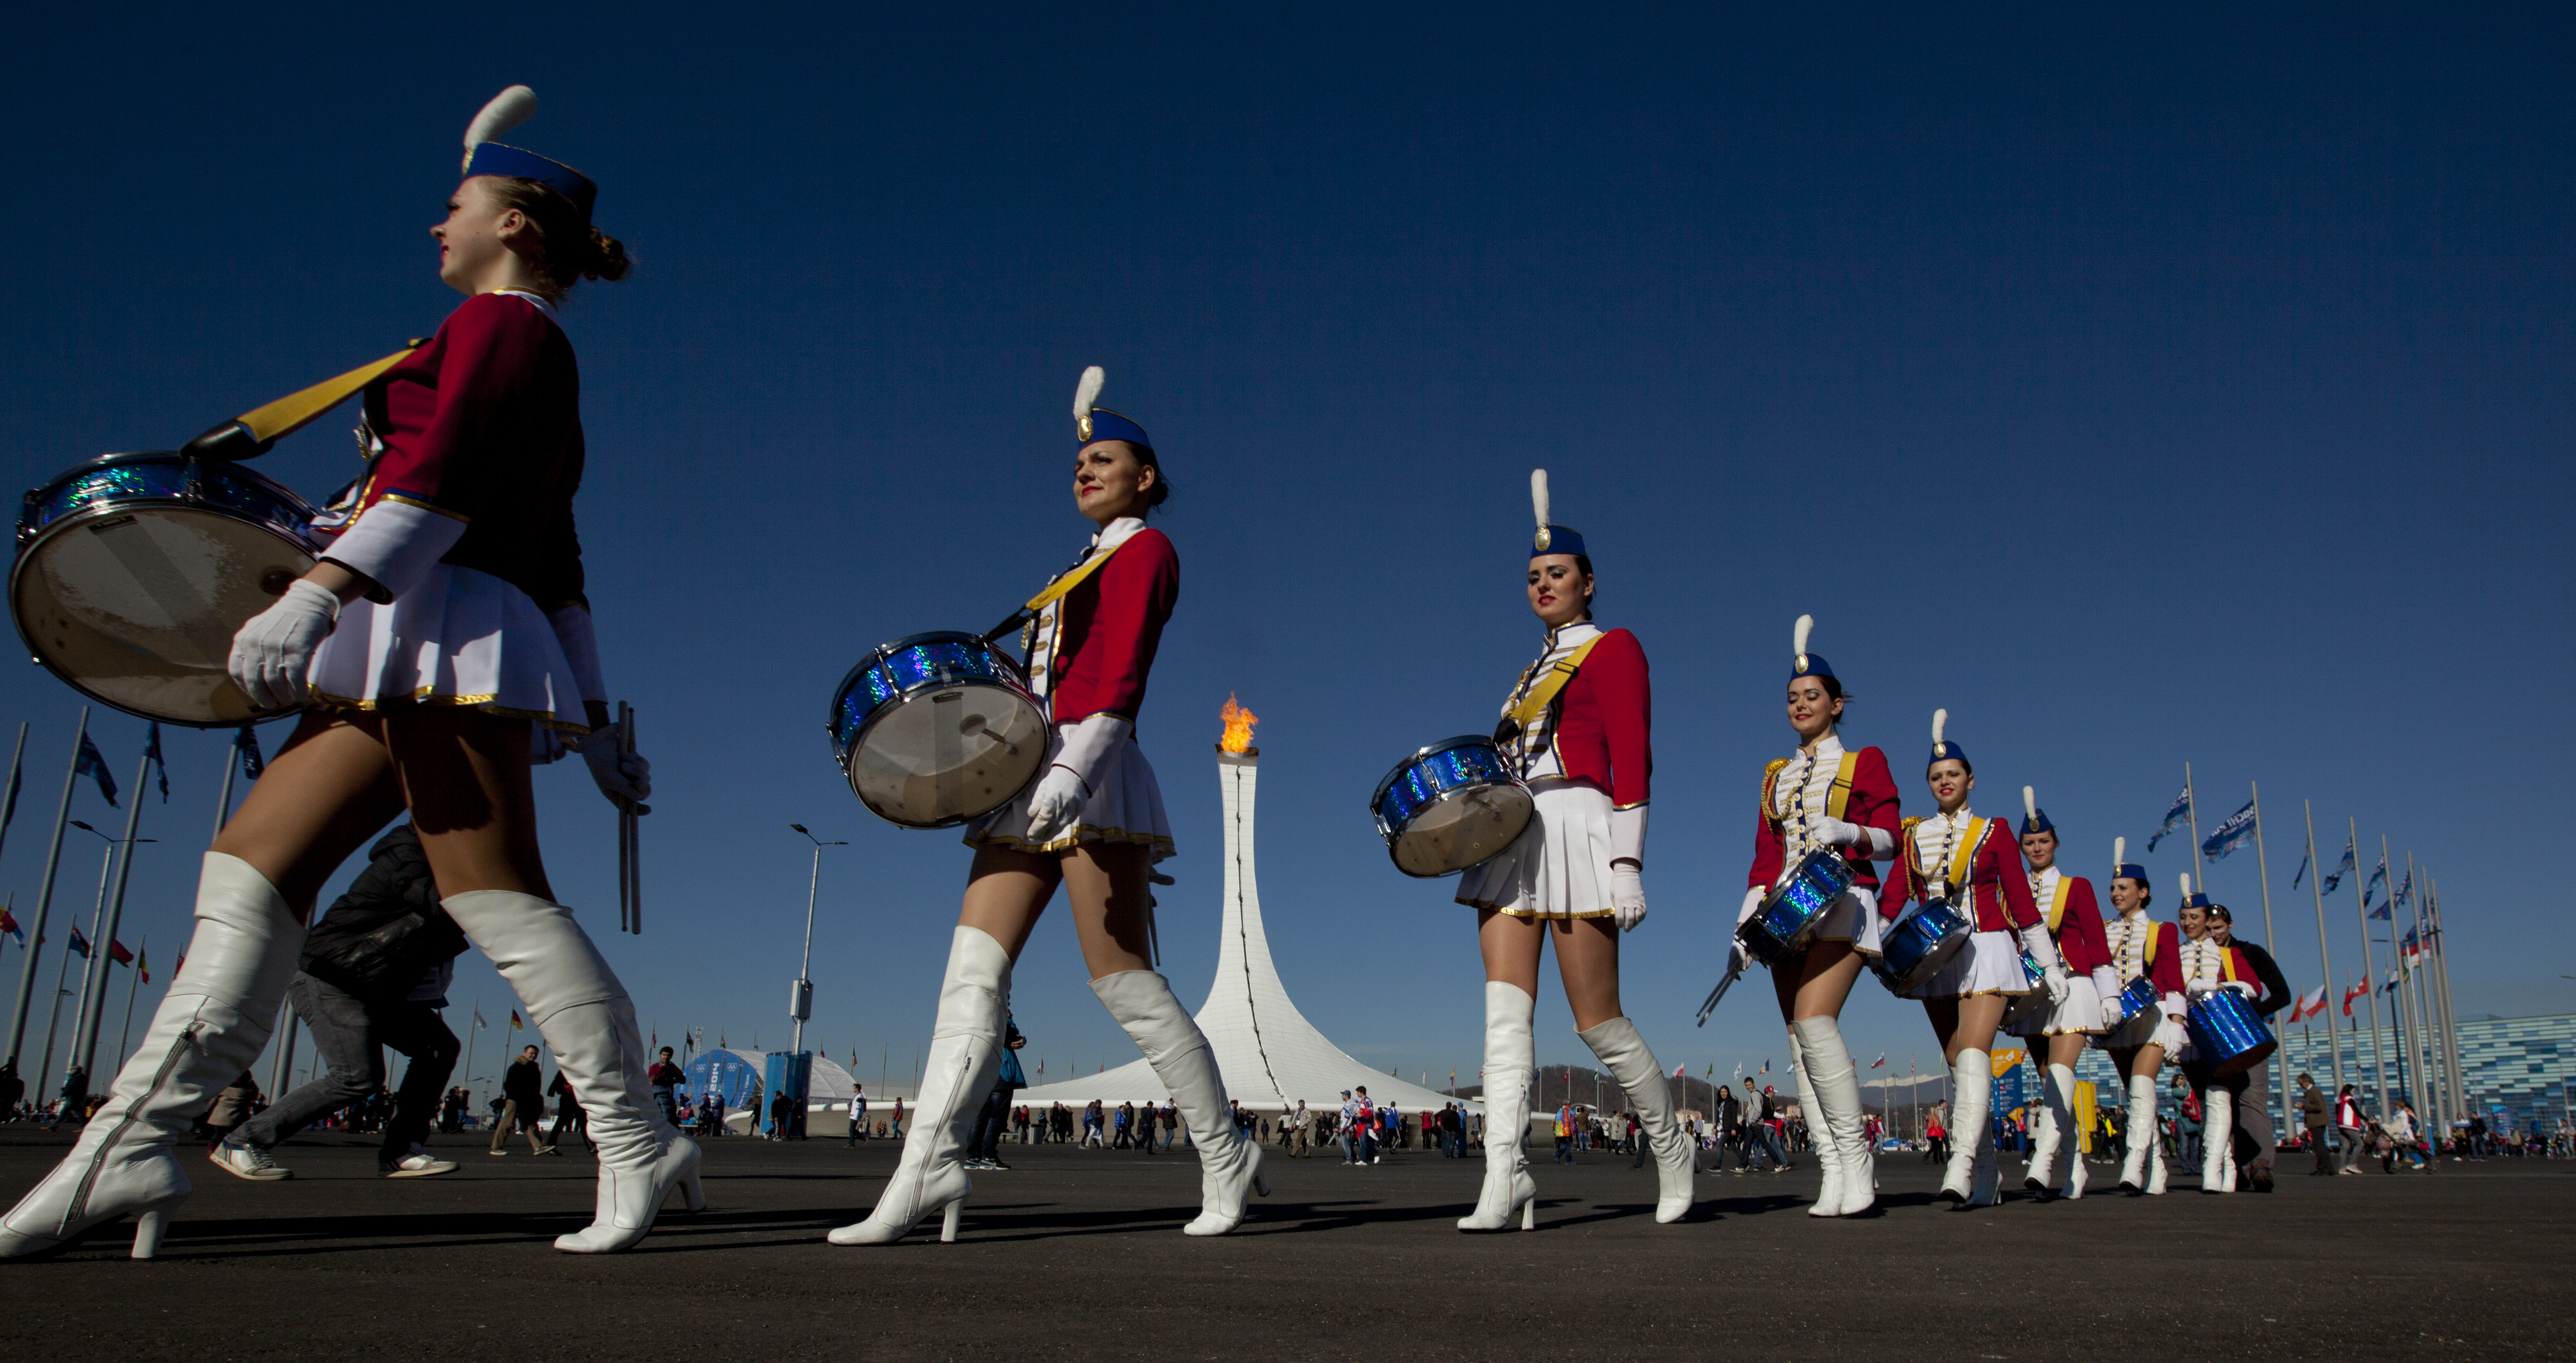 Cheerleaders walk to a venue past the burning Olympic cauldron during the 2014 Winter Olympics in Sochi, Russia, Feb. 13, 2014.